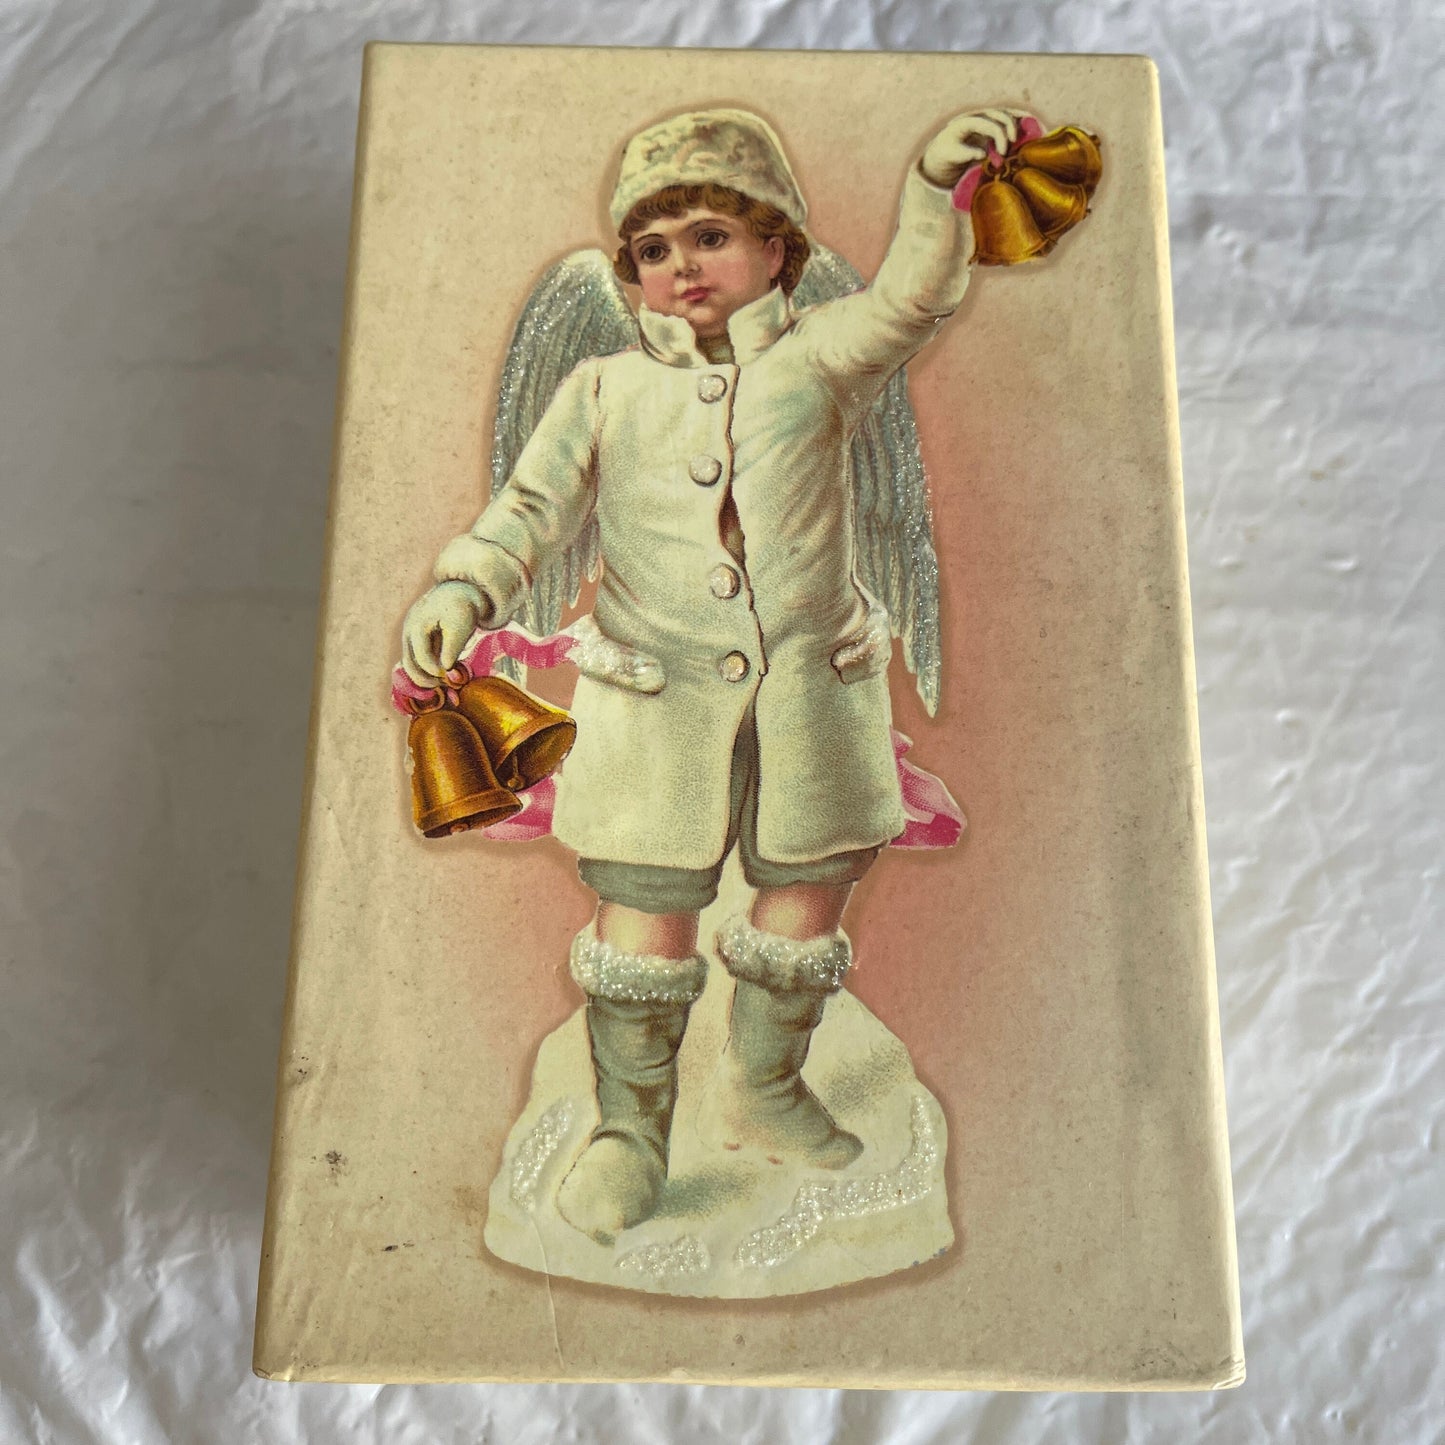 Beautiful Boy In Boots and Cap Angel Holding Bells Vintage Porcelain Christmas Ornament